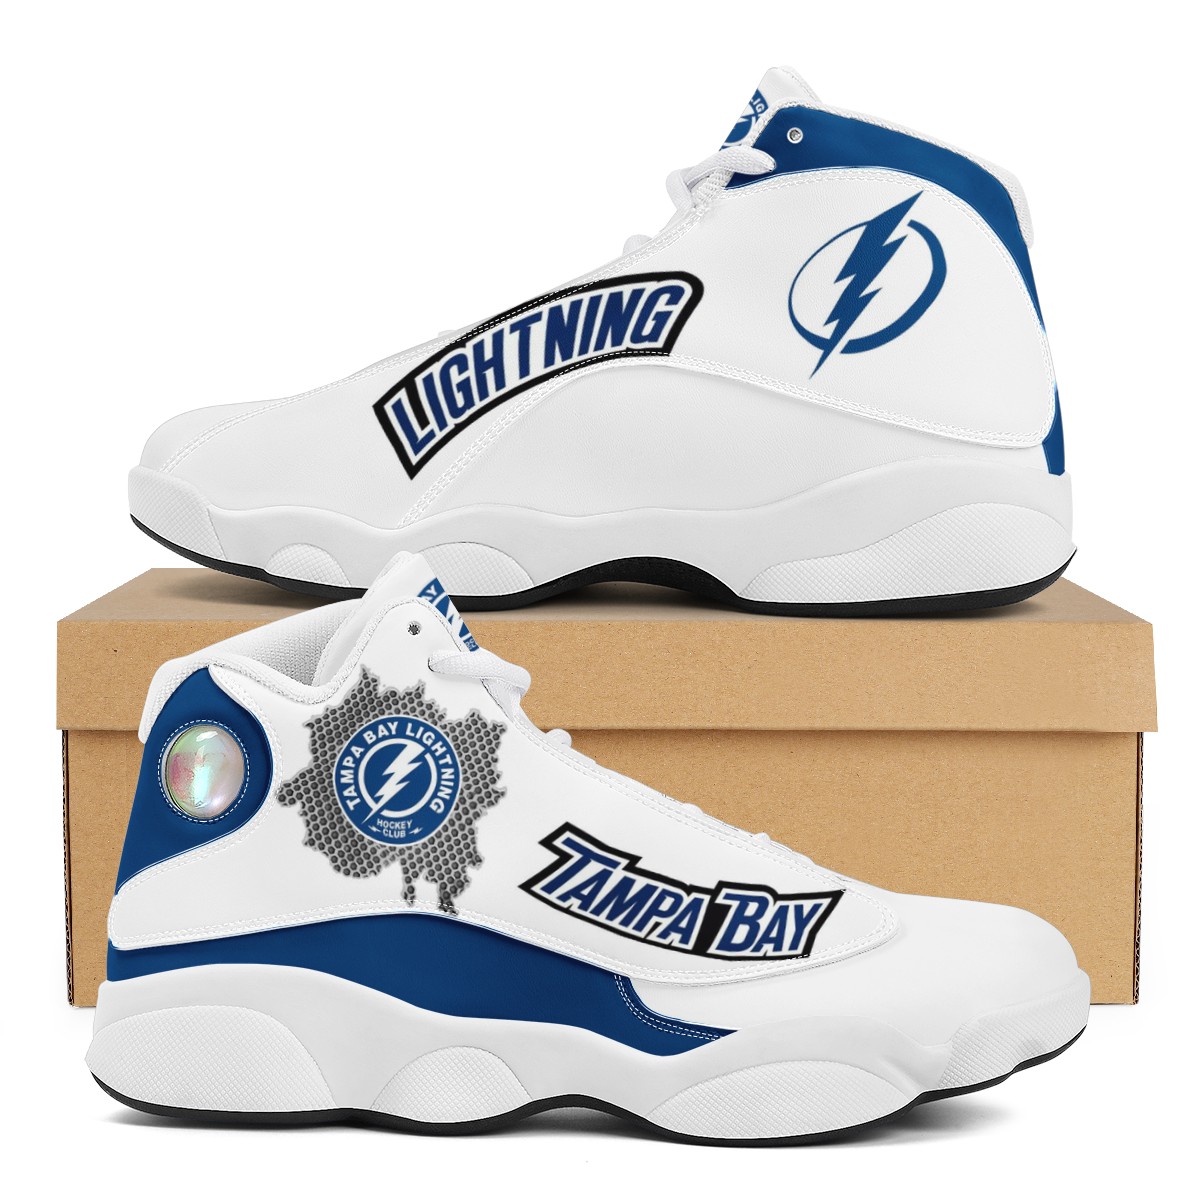 Women's Tampa Bay Lightning Limited Edition JD13 Sneakers 002